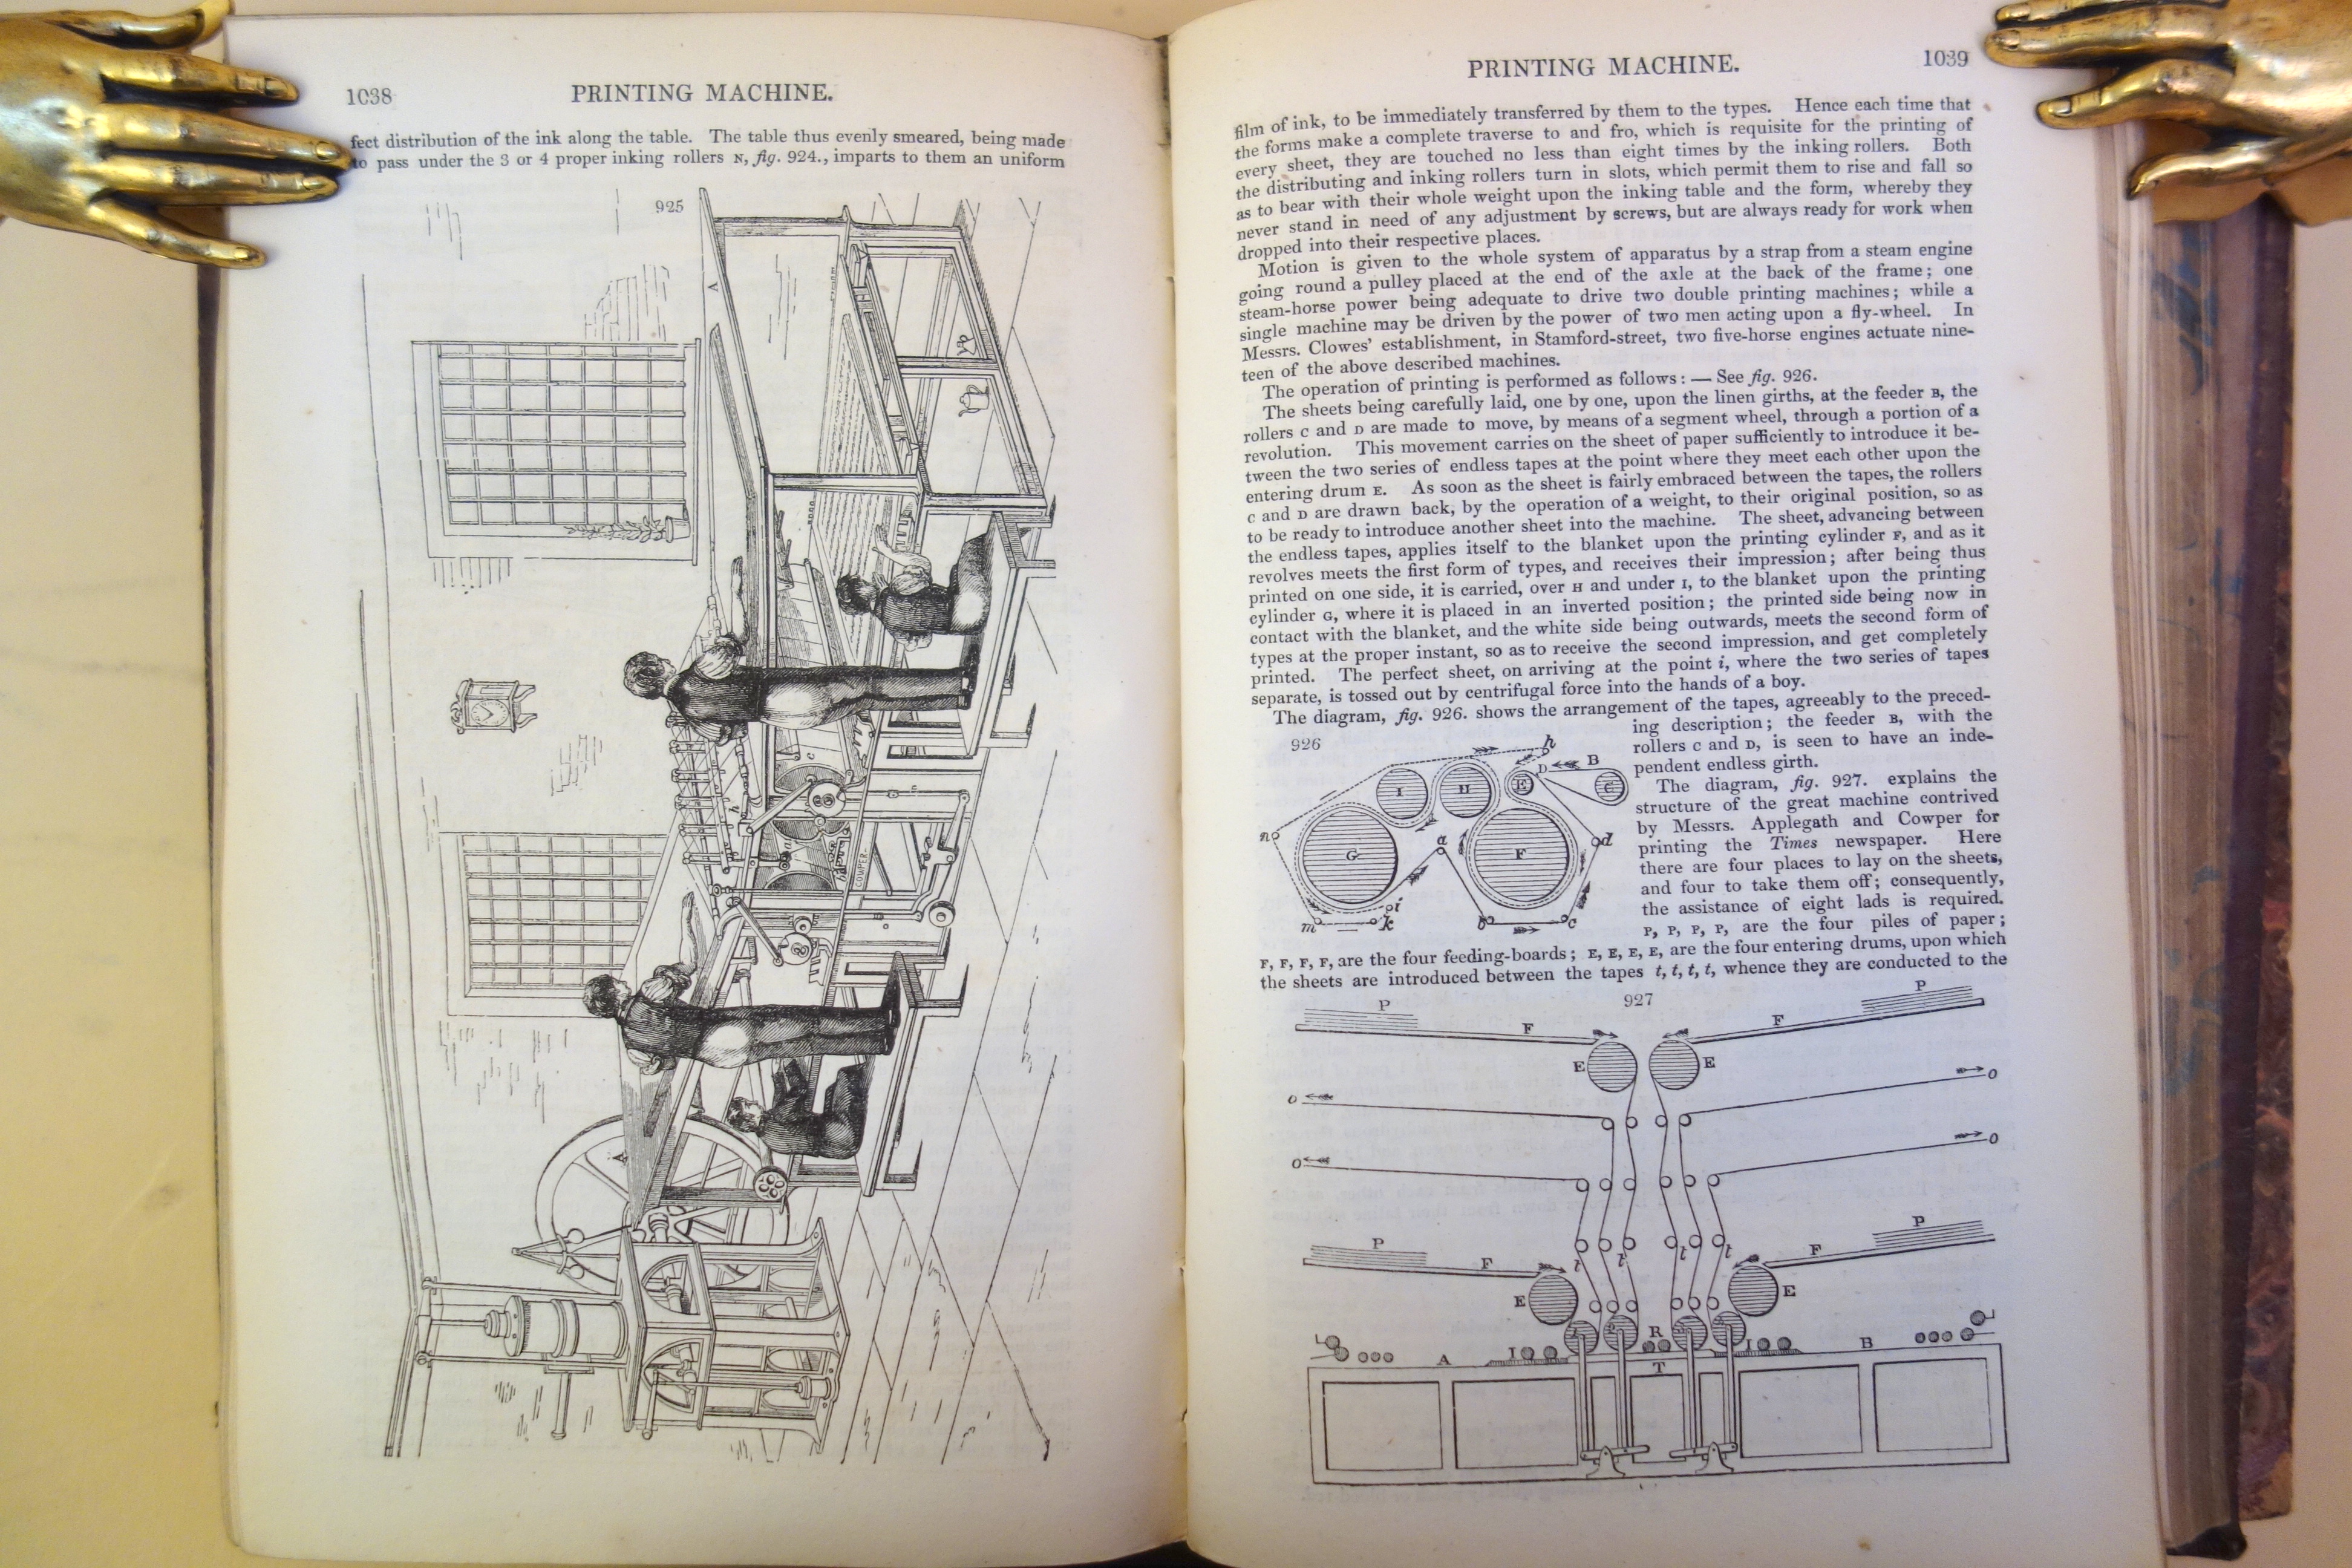 Ure's image of a double-cylinder machine driven by a Maudslay table steam engine was probably reproduced from Timperley's book issued the same year. 